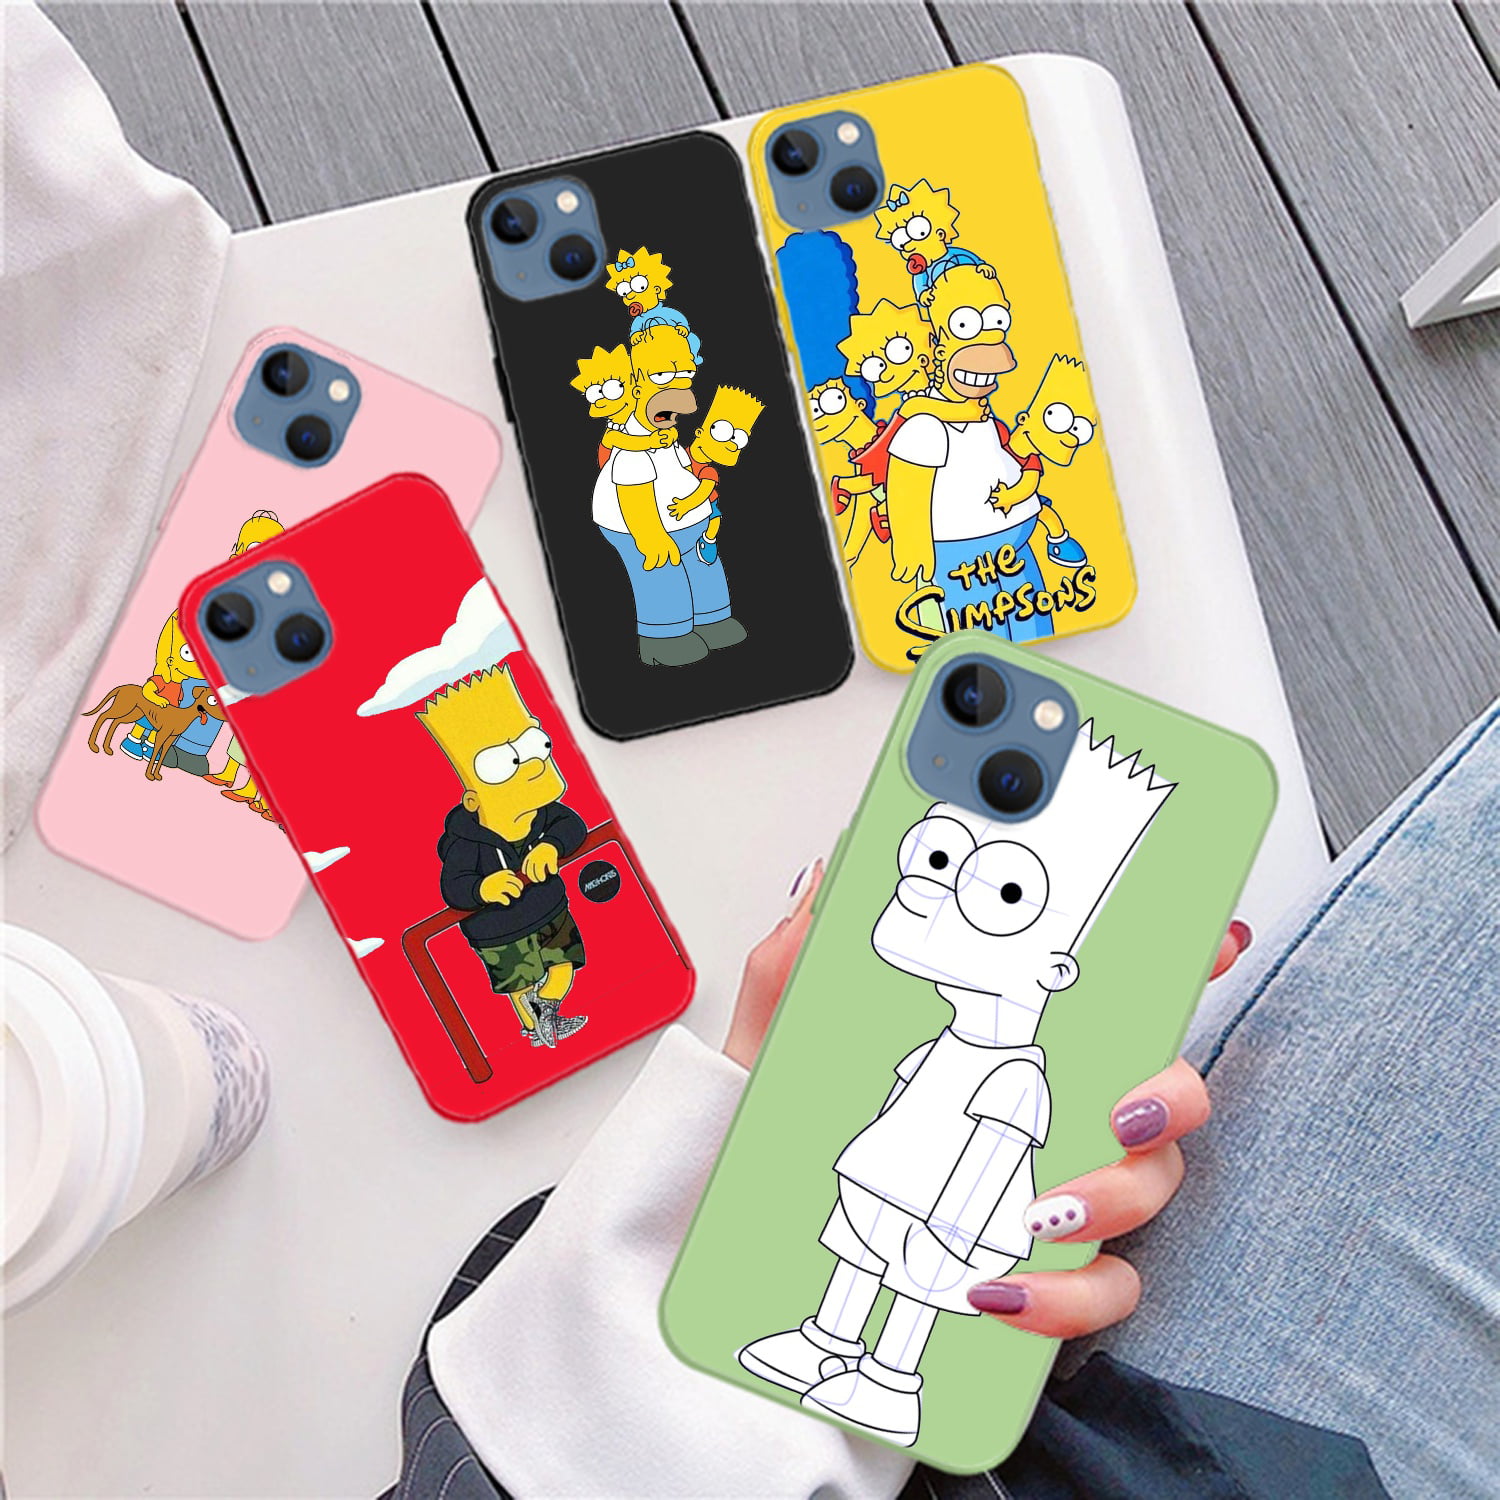 Yellow Bear, iPhone 11 TiKeDa iPhone 11 Silicone Case with 3D Cartoon Animal Zipper Wallet Purse Holder Stand and Long Detachable Necklace for Apple iPhone 11 6.1